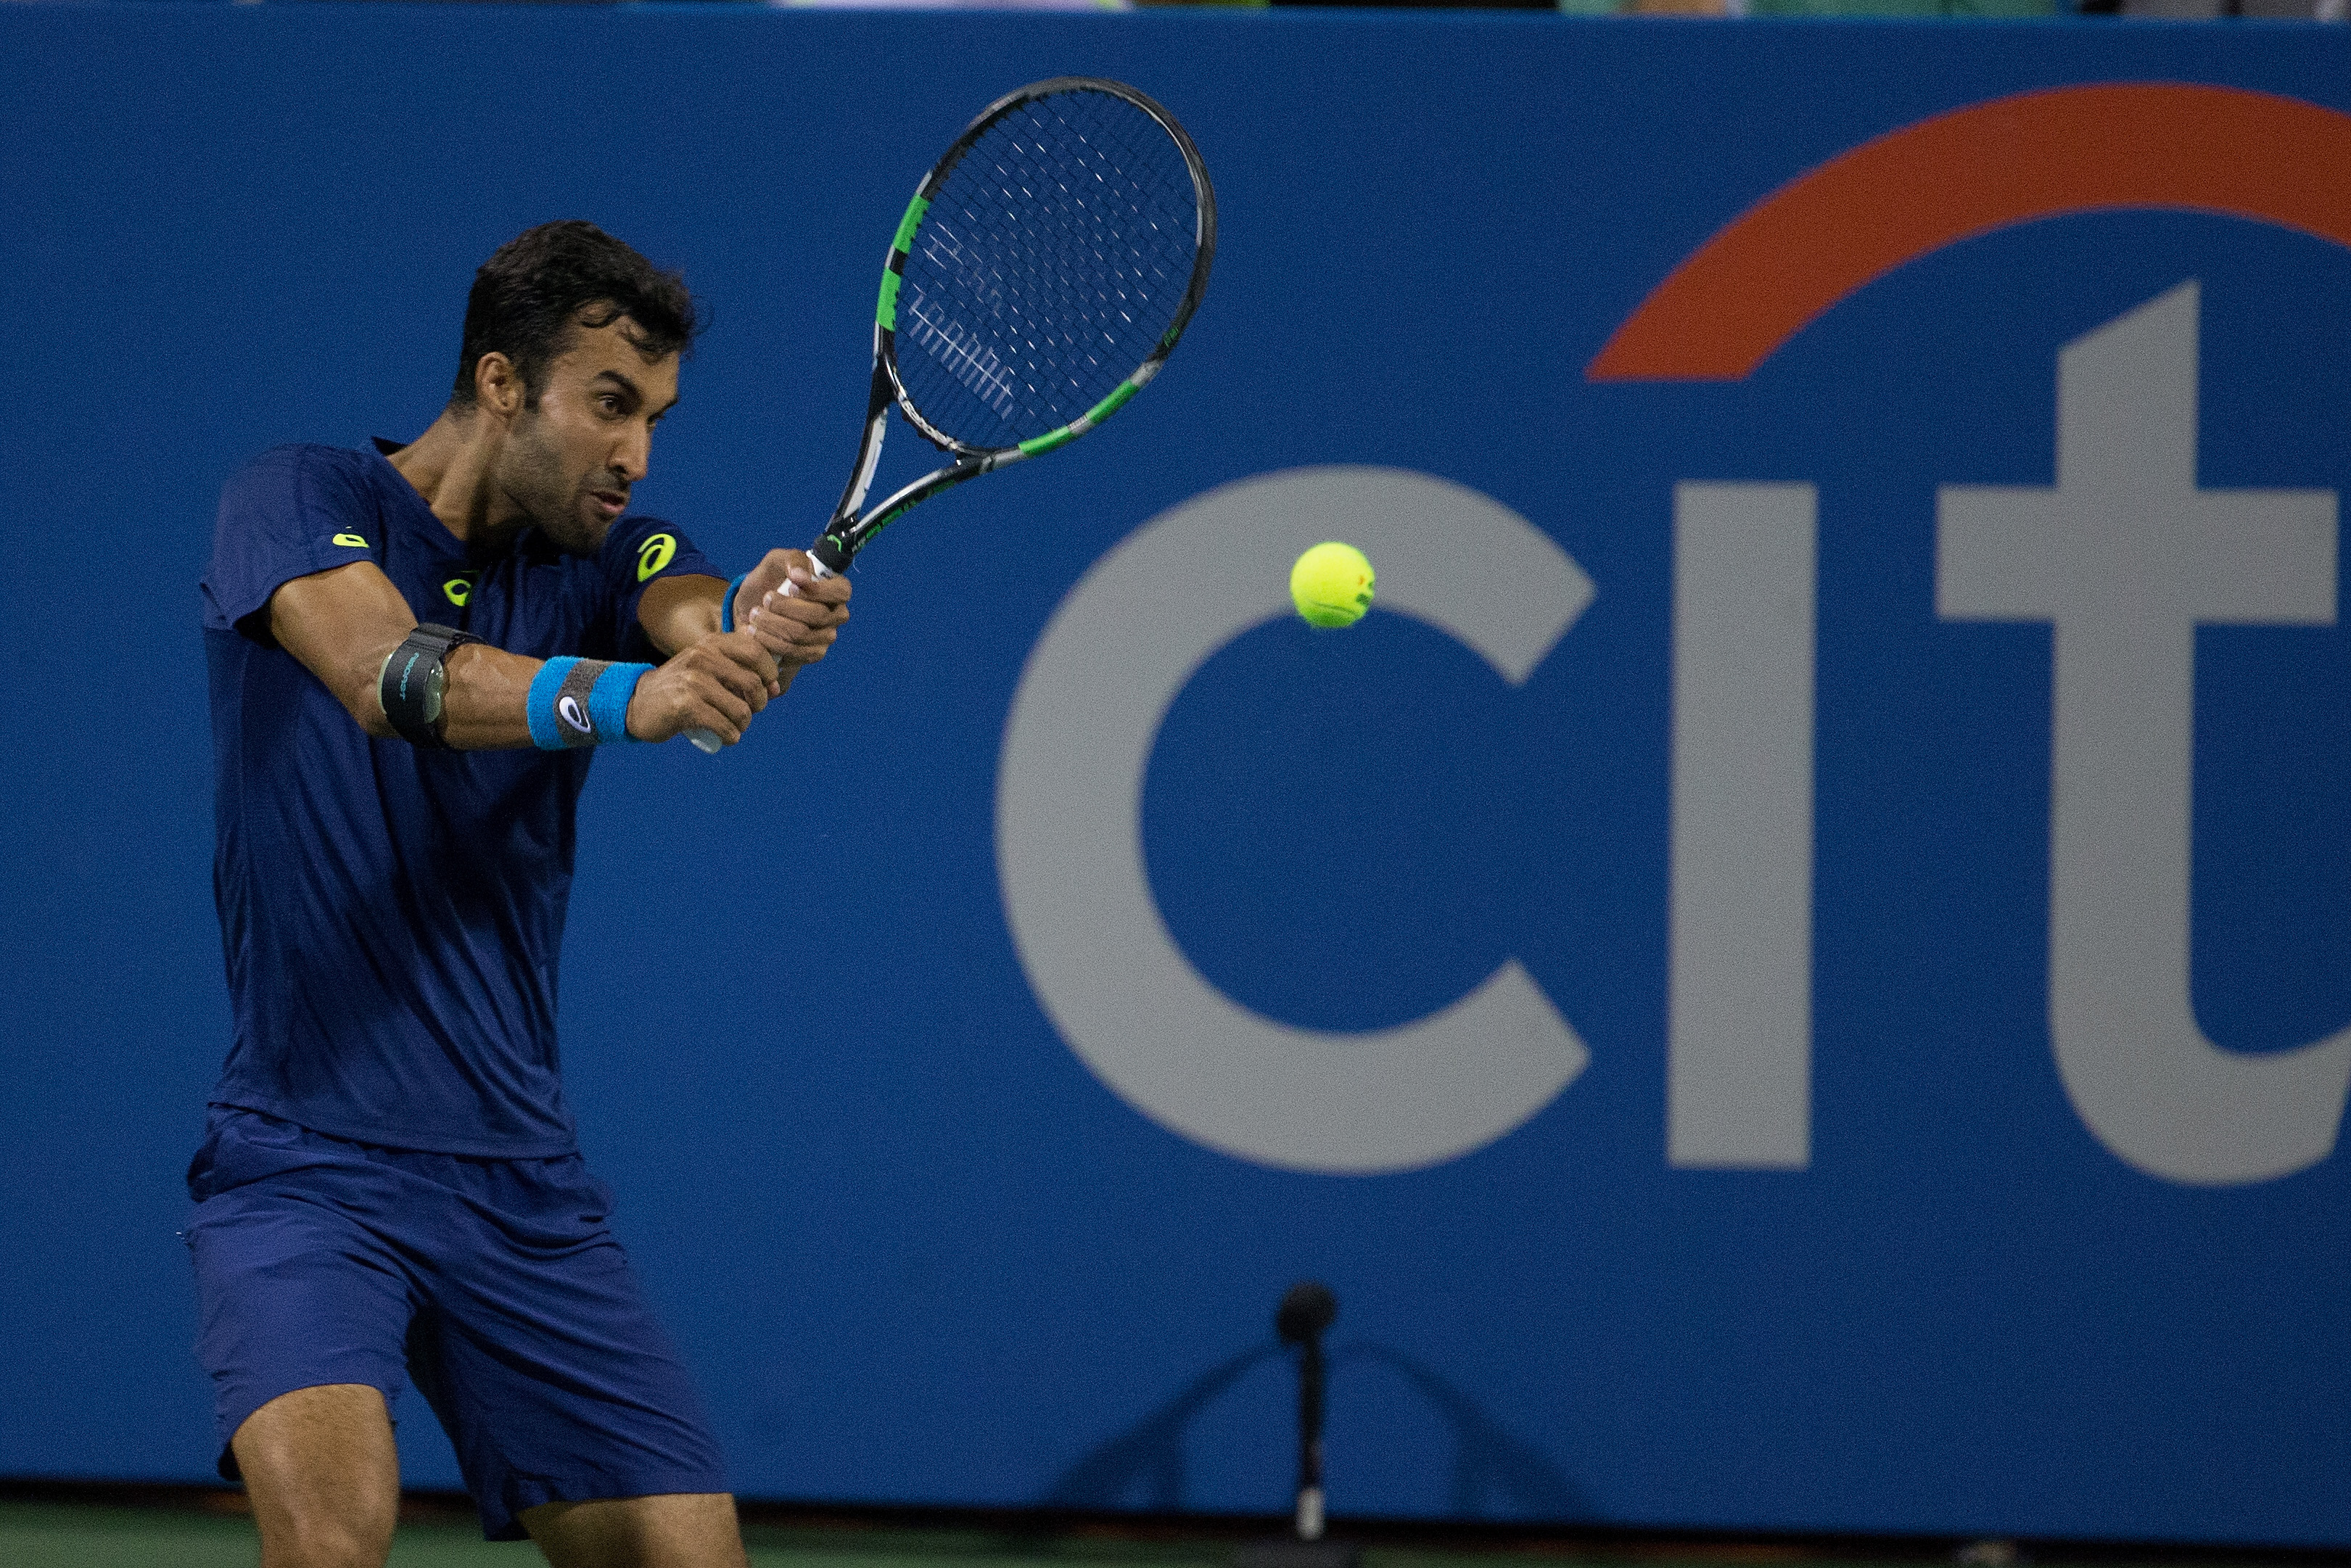 U.S. Open | Yuki Bhambri loses to Pierre-Hugues Herbert in the first round